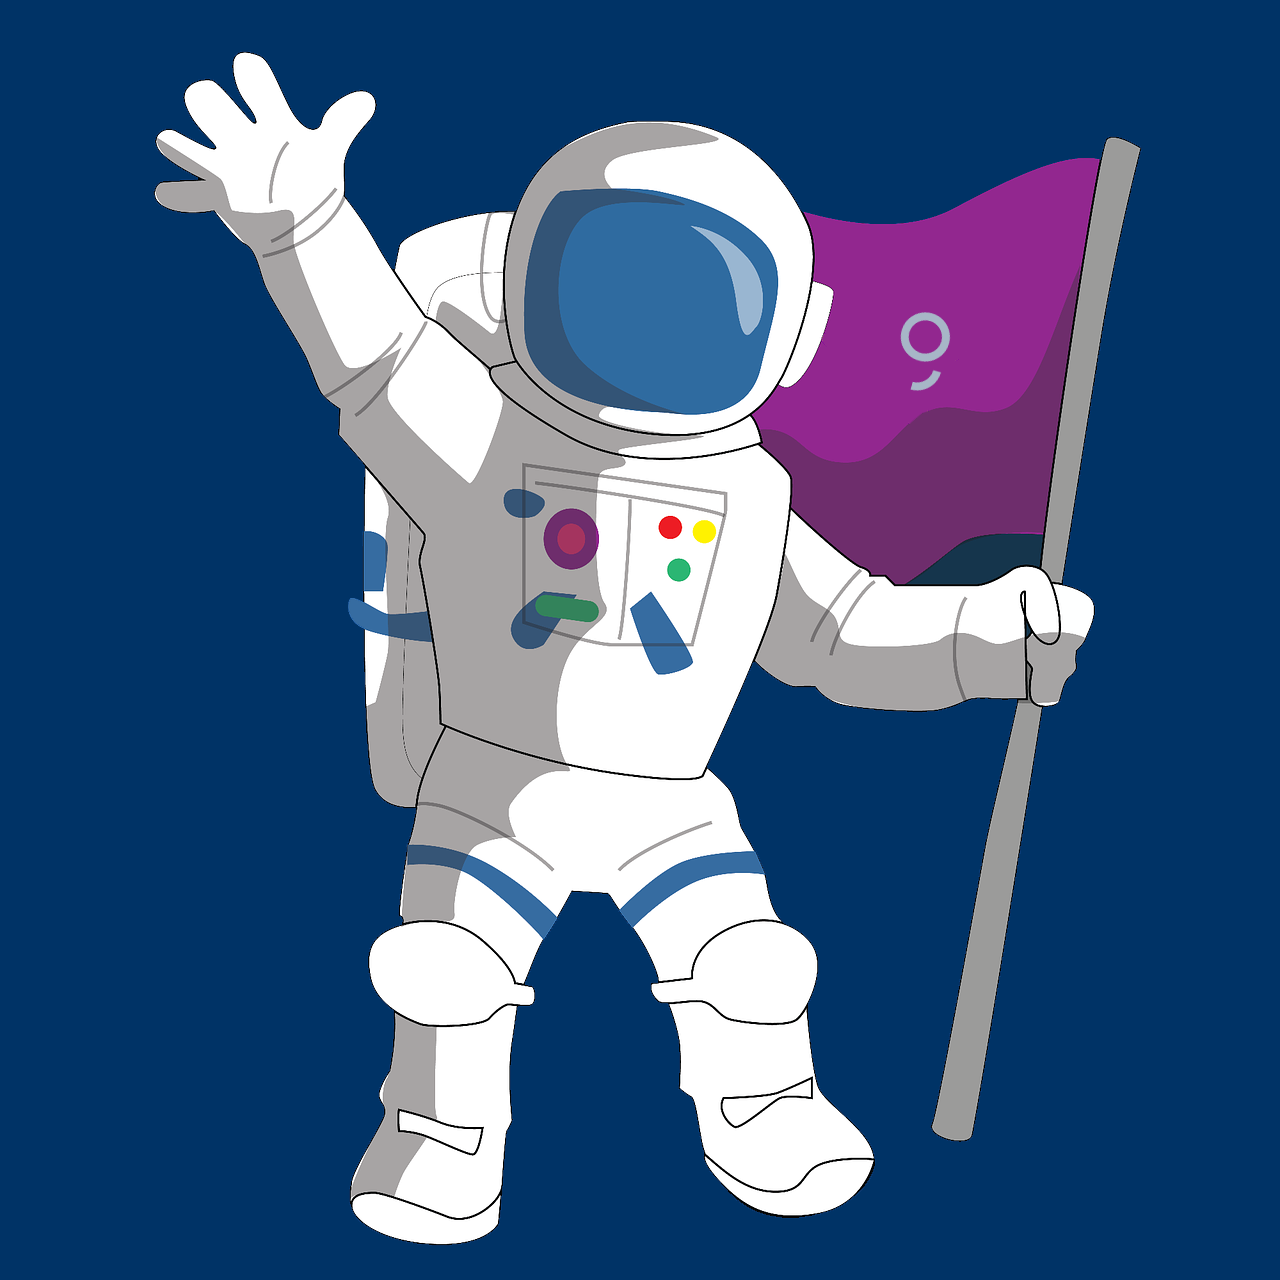 Illustration of an astronaut waving and holding a flag.